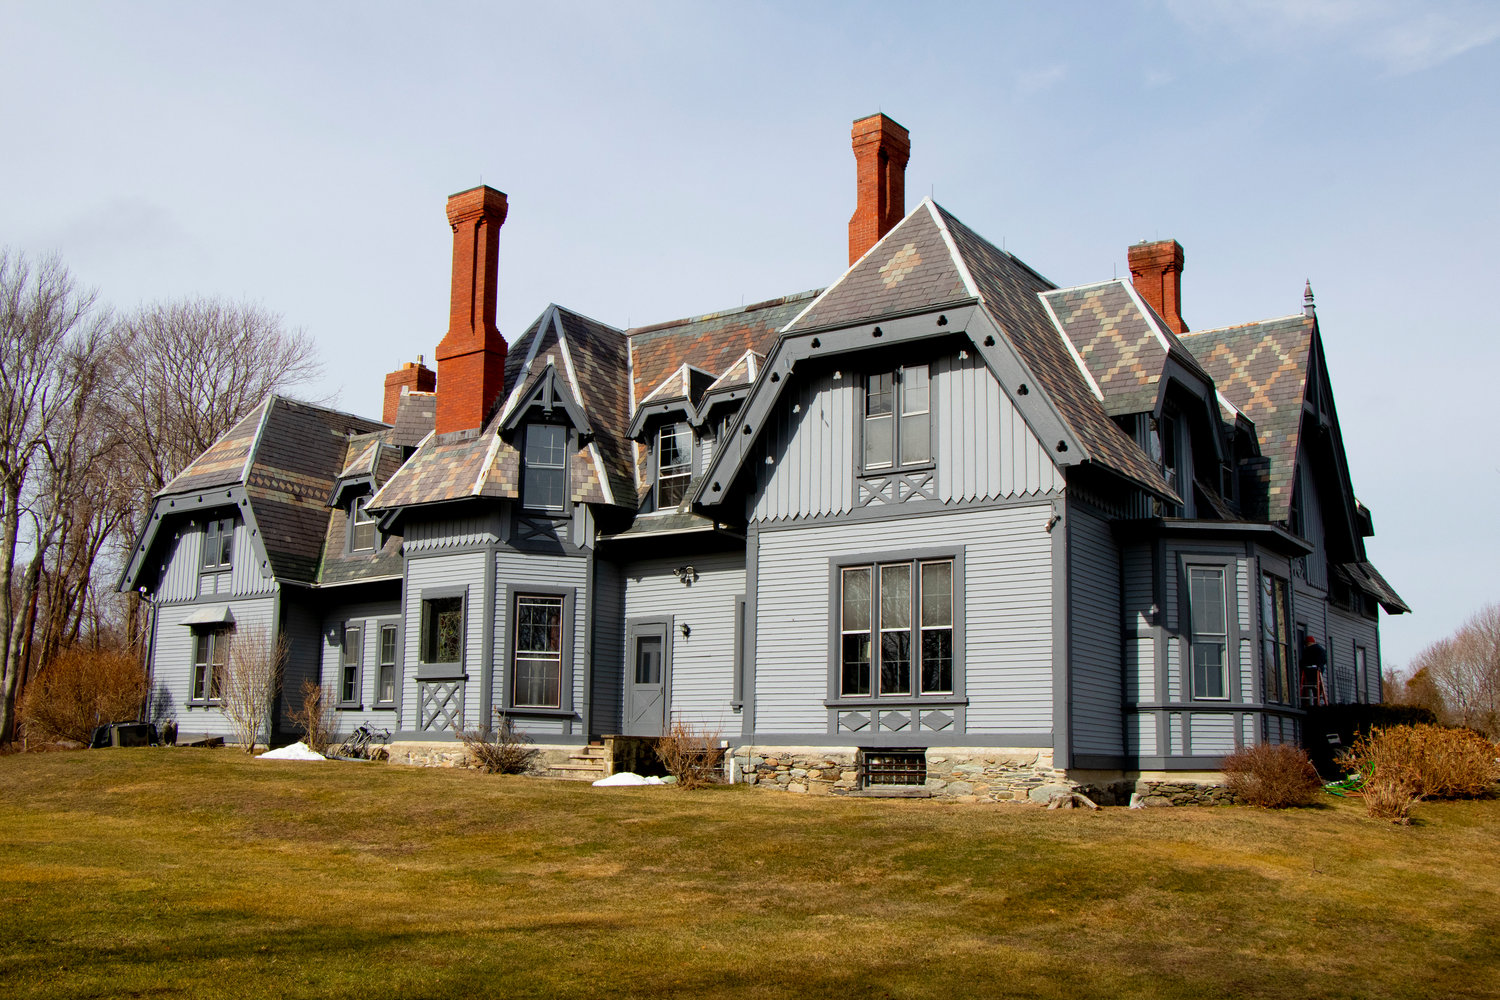 The owners of Greenvale Vineyards live in — and are renovating — a Gothic-style home built more than 150 years ago that is on the National Register of Historic Places. Its 12,000 square feet and 20 rooms enjoy a high perch overlooking the Sakonnet River.